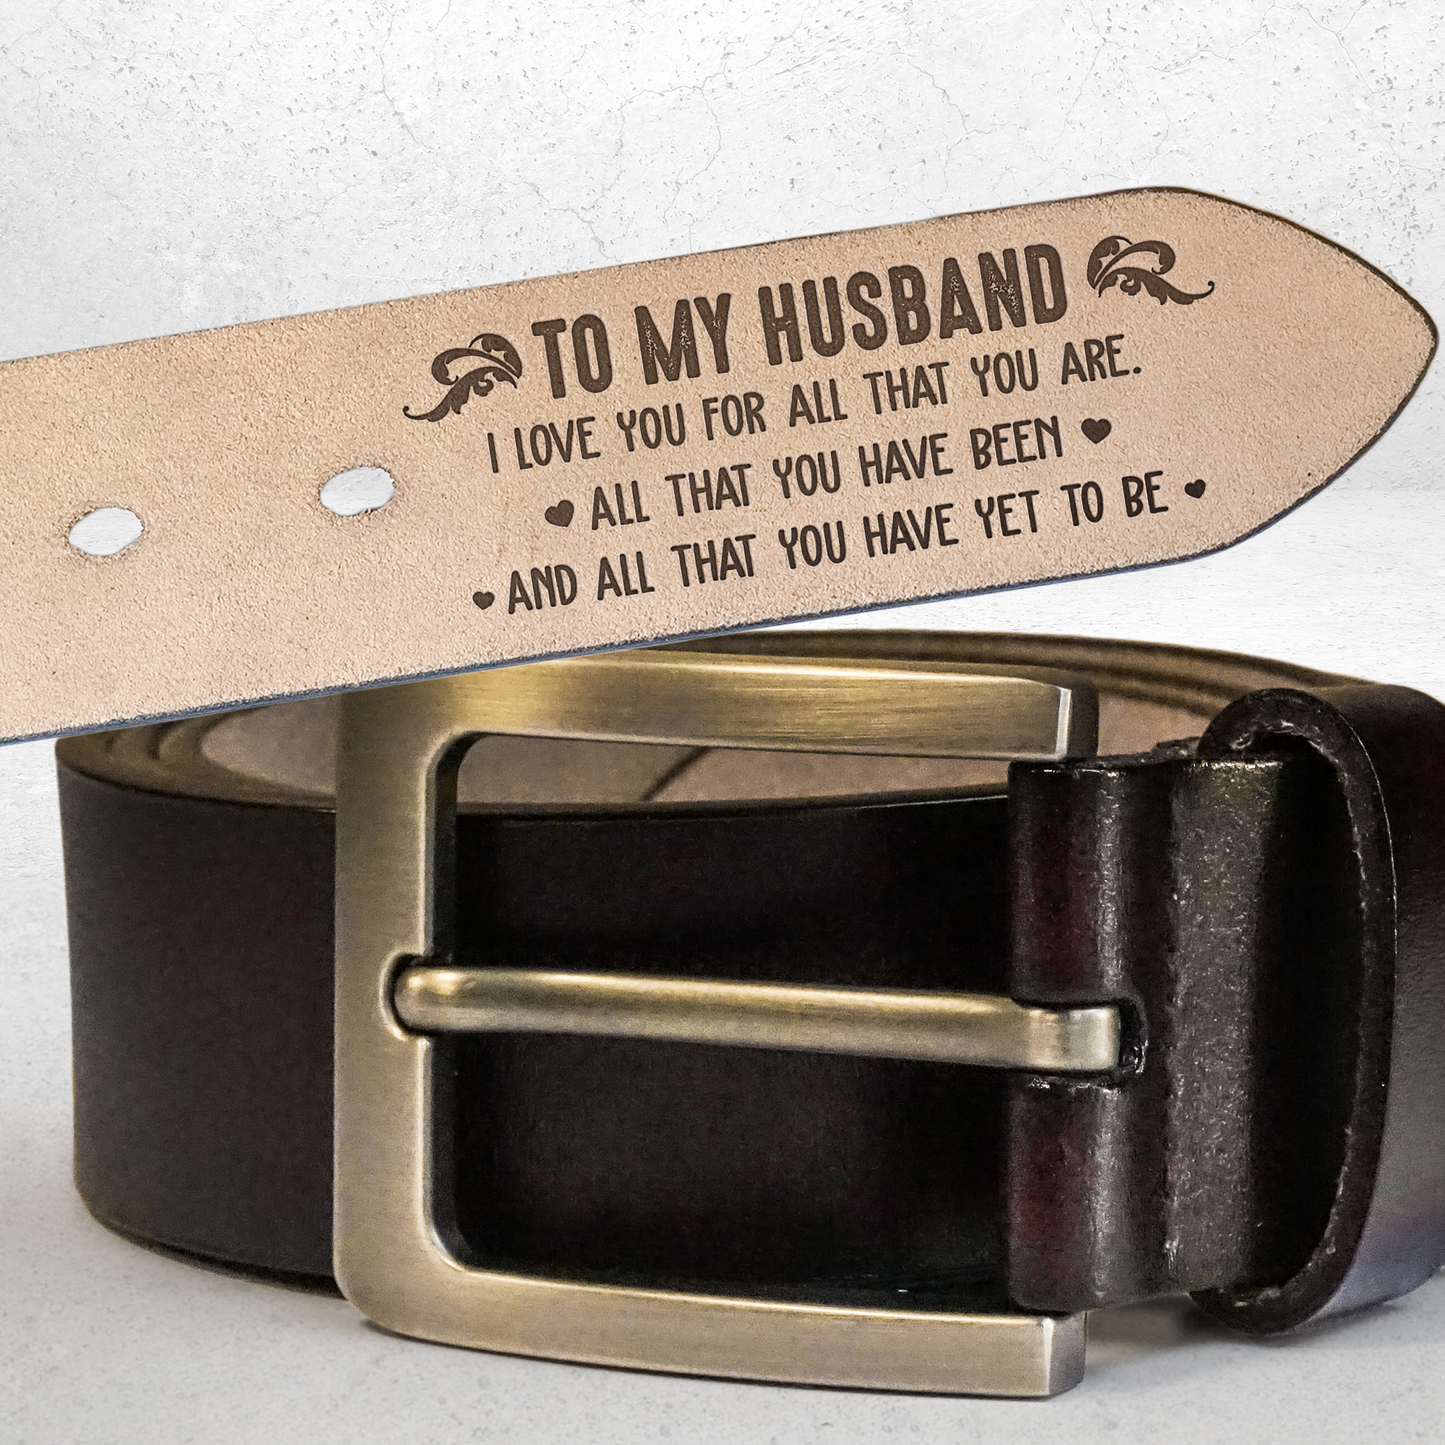 I Love You For All That You Are - Personalized Engraved Leather Belt